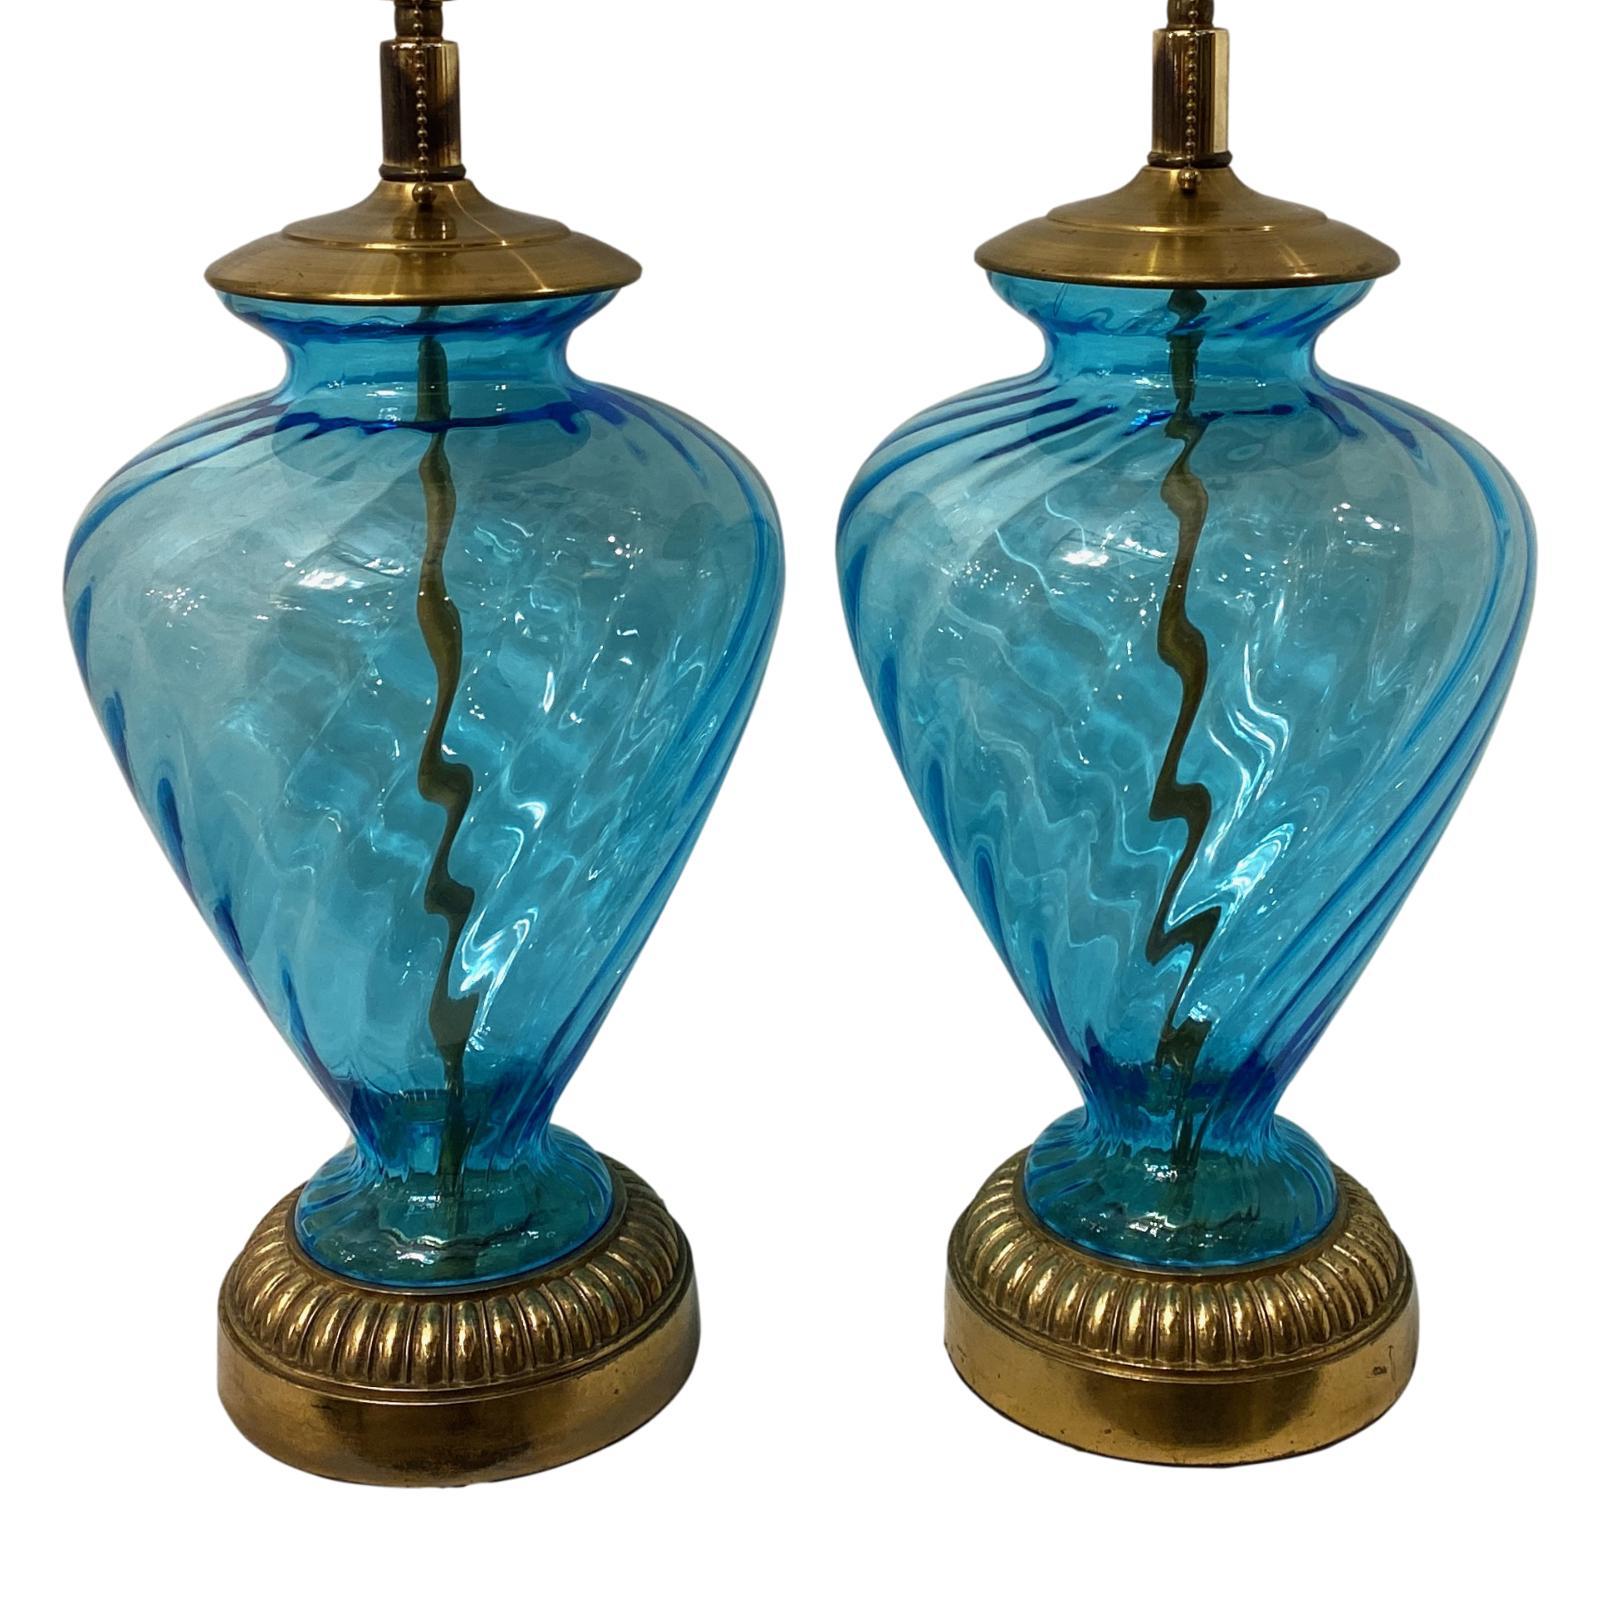 Pair of circa 1940's Italian blown glass table lamps with bronze bases.

Measurements:
Height of body 19